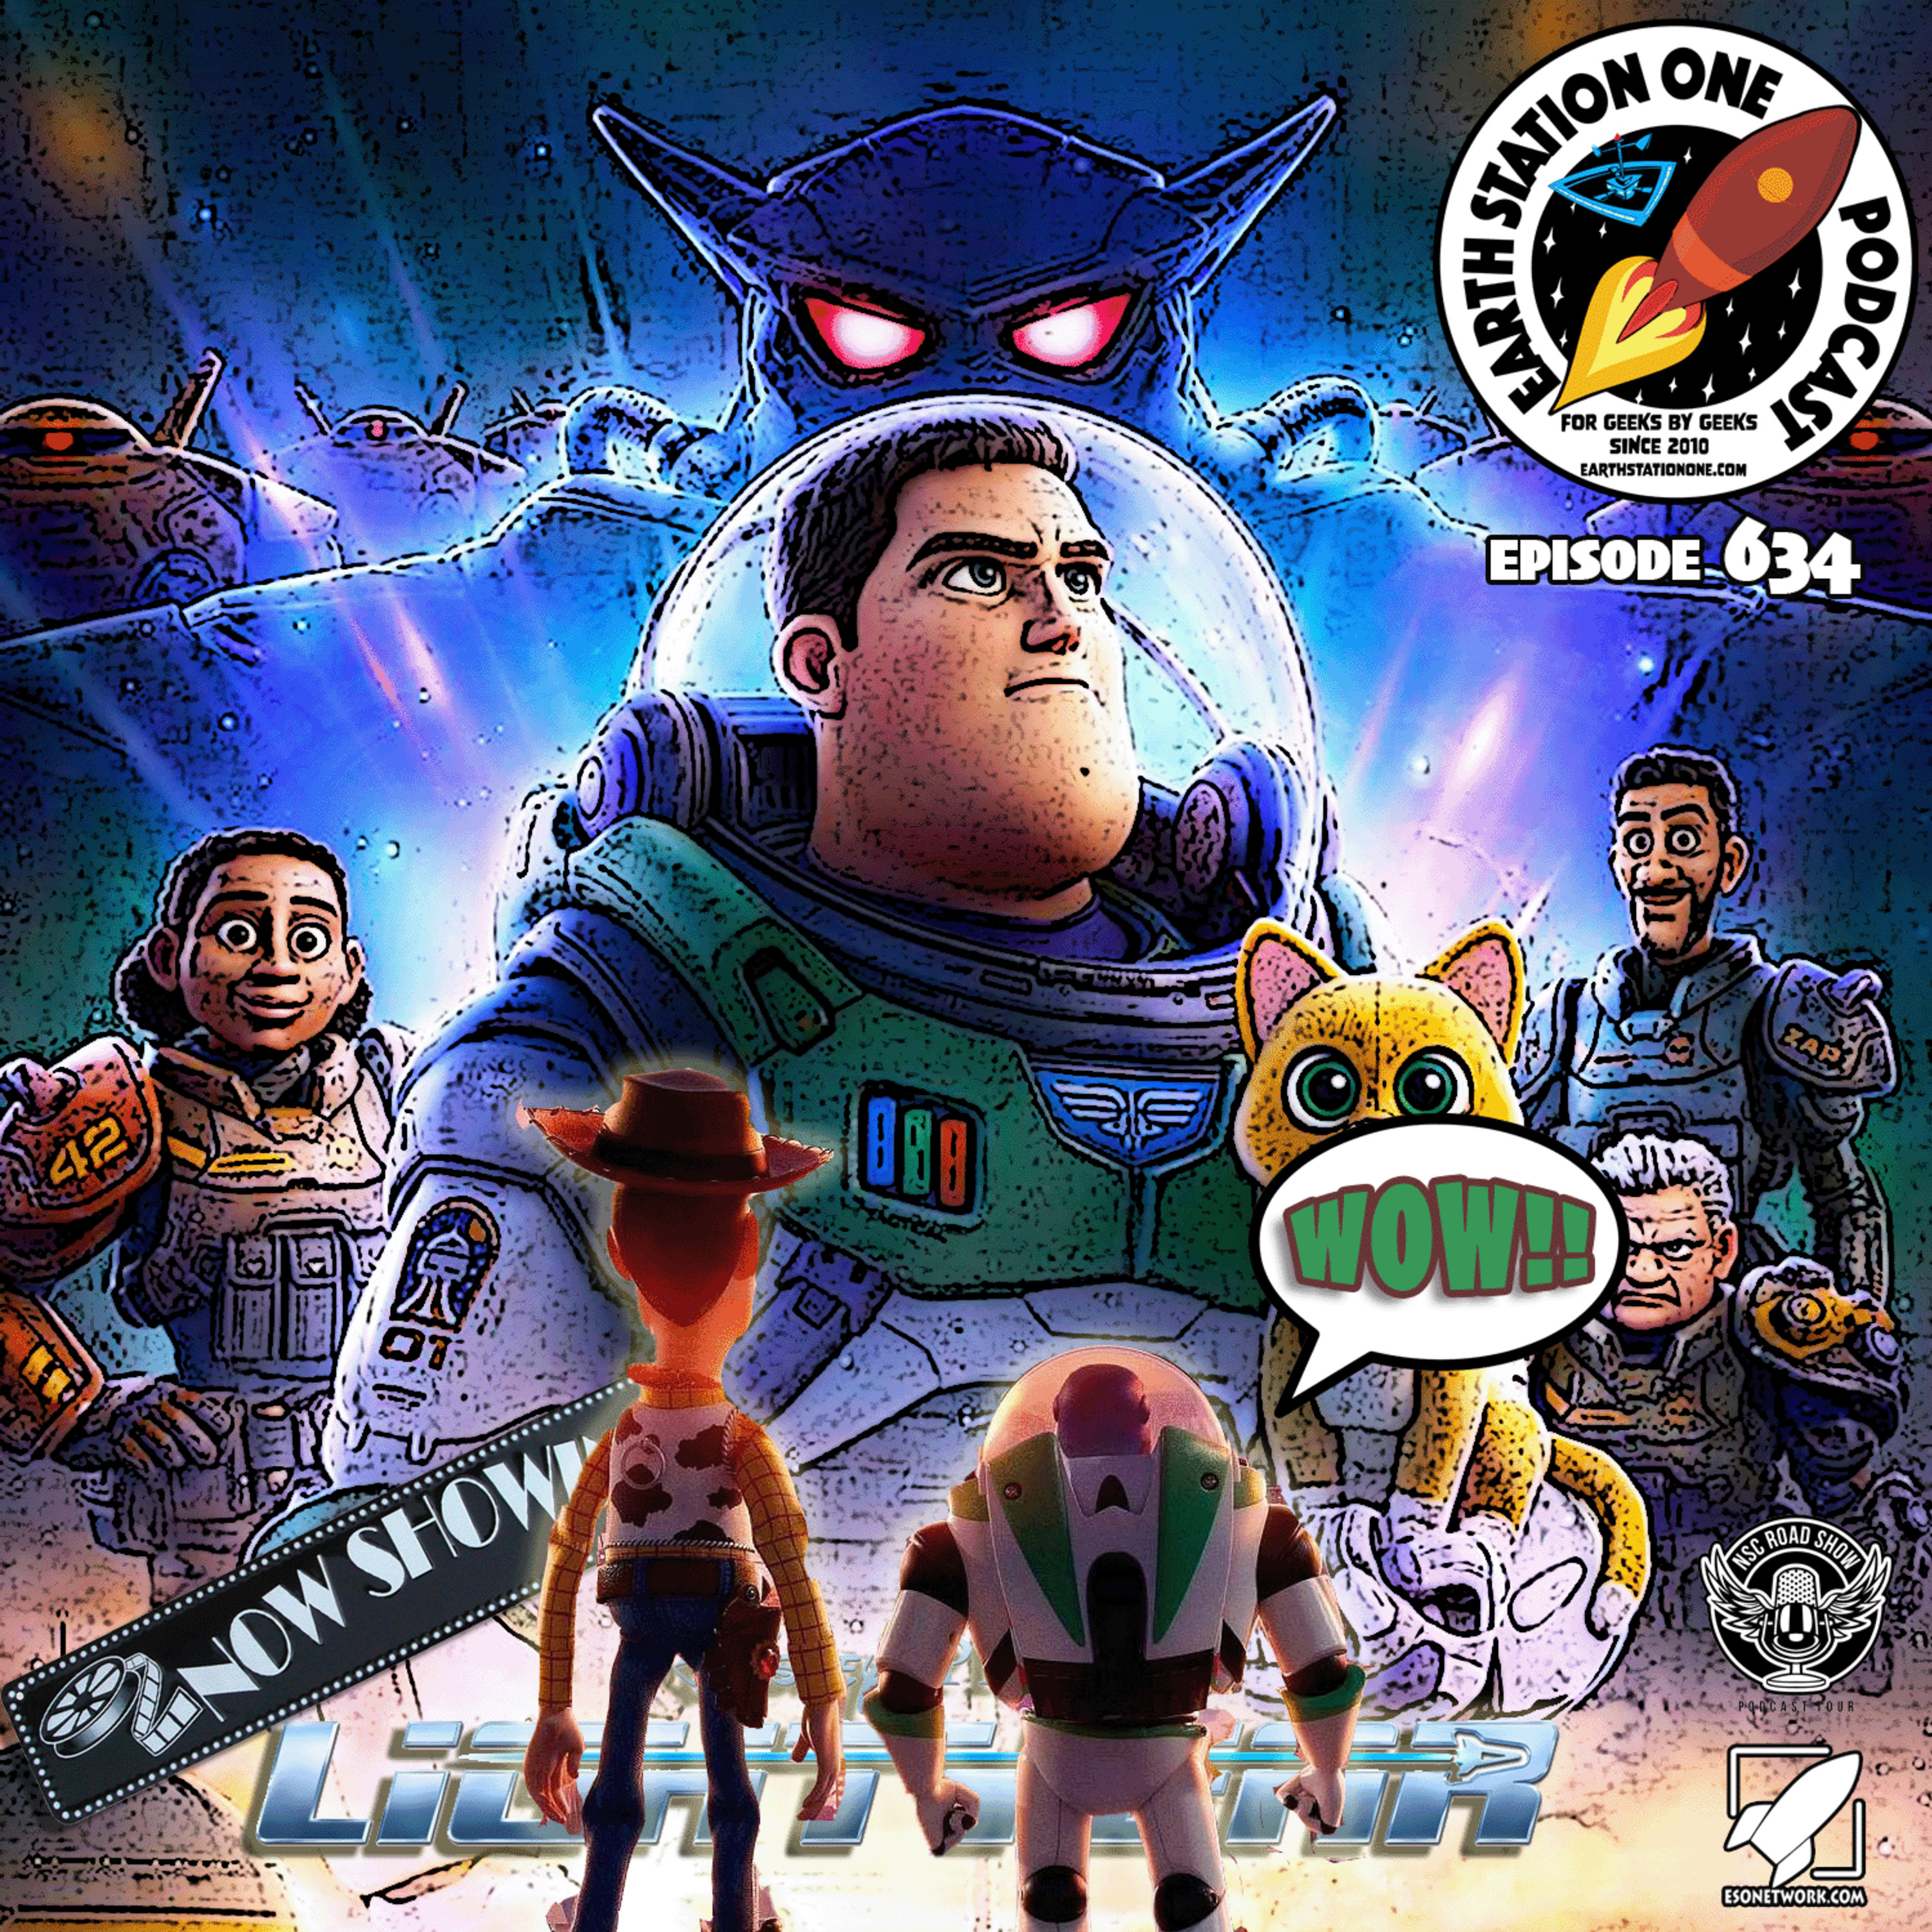 The Earth Station One Podcast - Lightyear Review